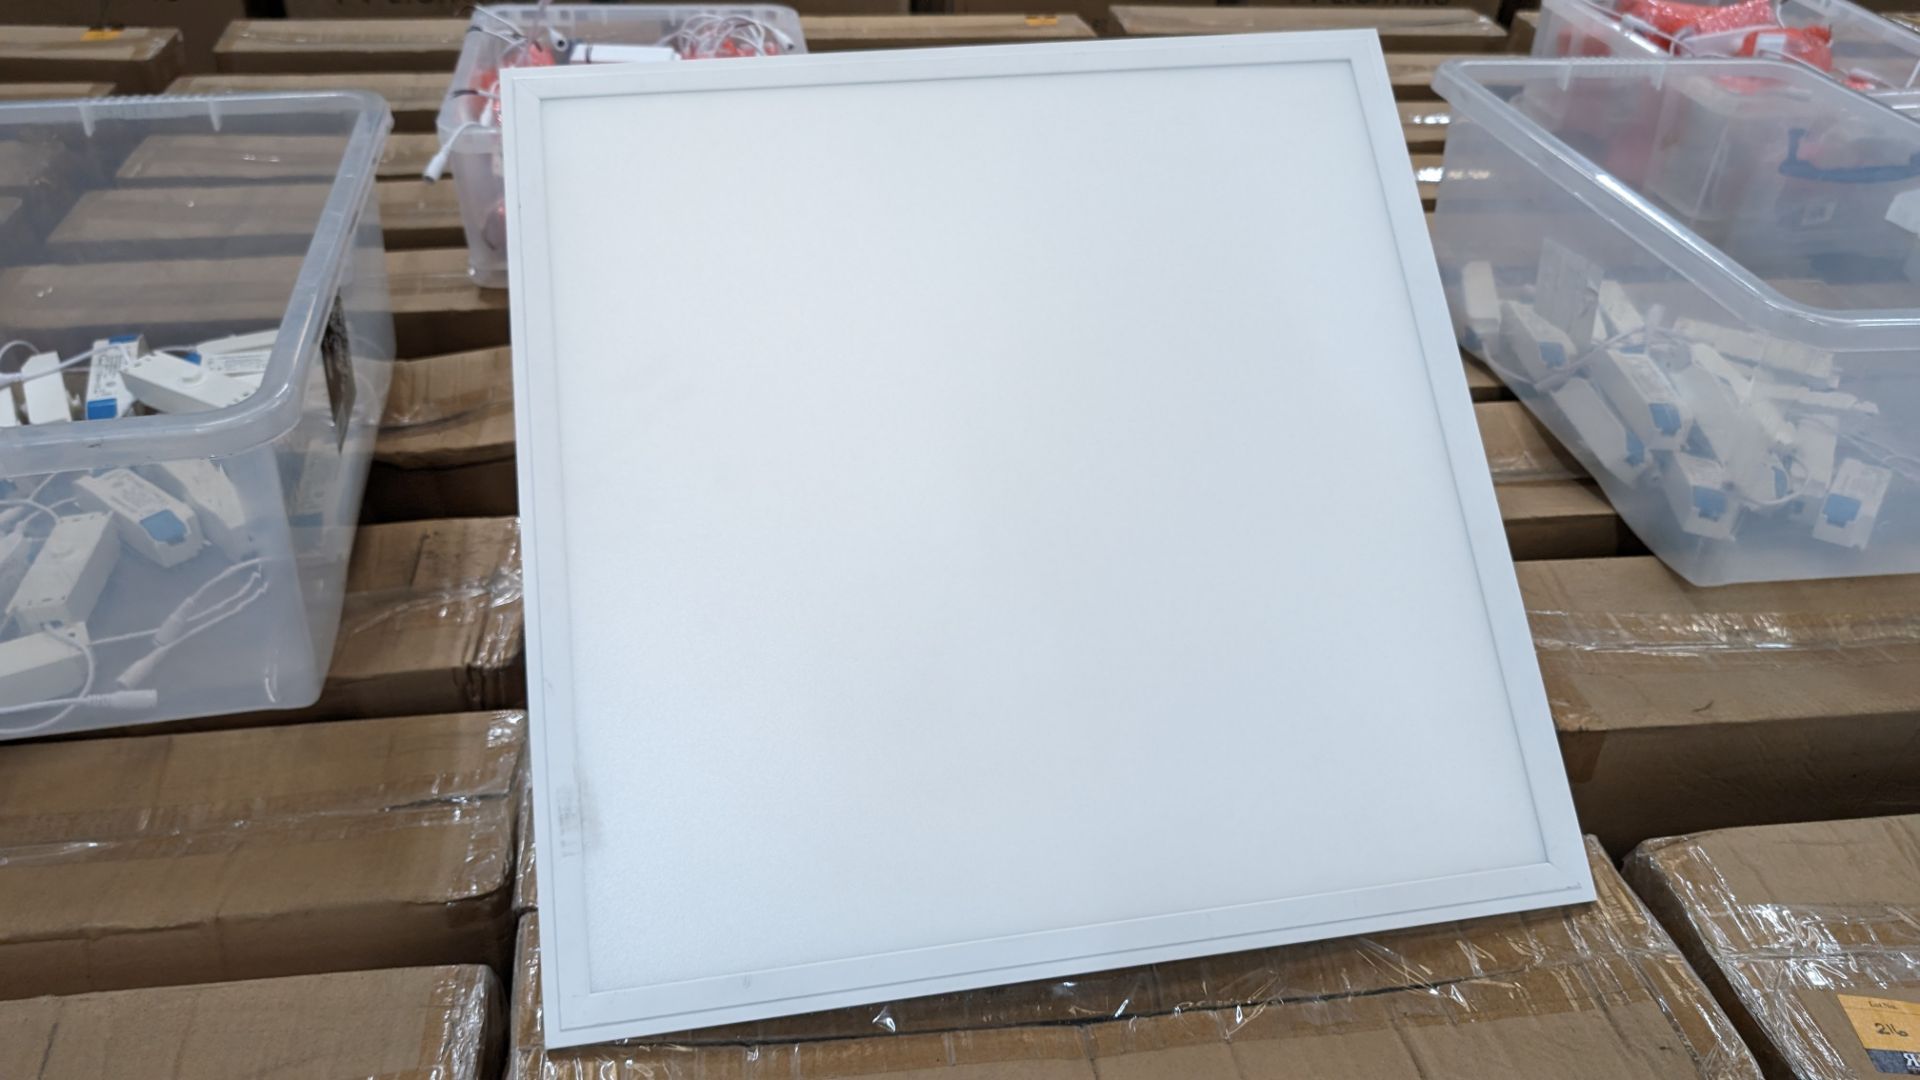 16 off 600mm x 600mm 36w 6000k 4320 lumens cold white LED lighting panels. 36w drivers. This lot c - Image 6 of 16